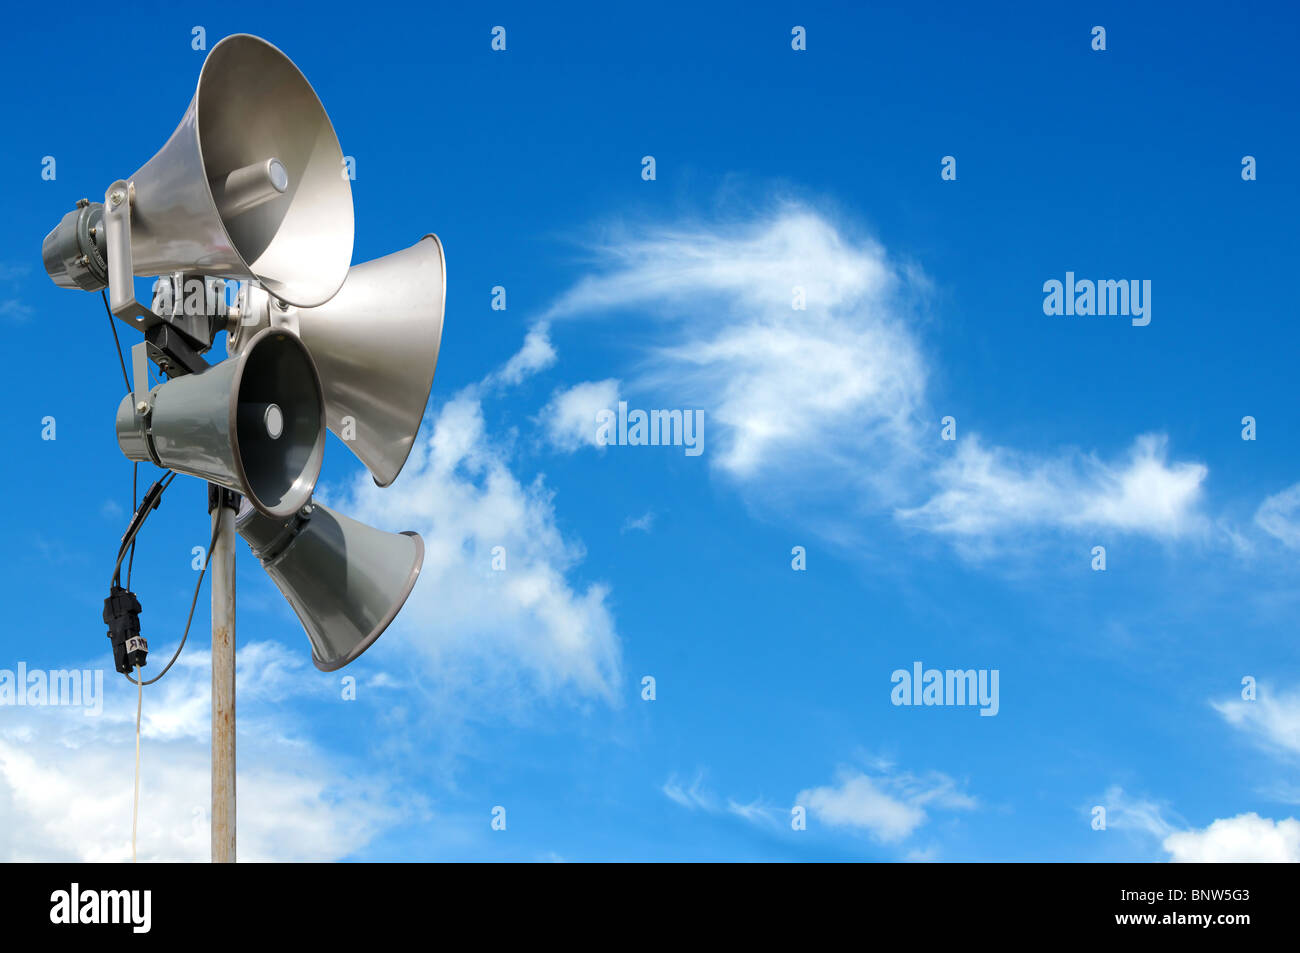 PA / Public Address system speakers, against a bright blue sky, with space for your text / editorial overlay Stock Photo